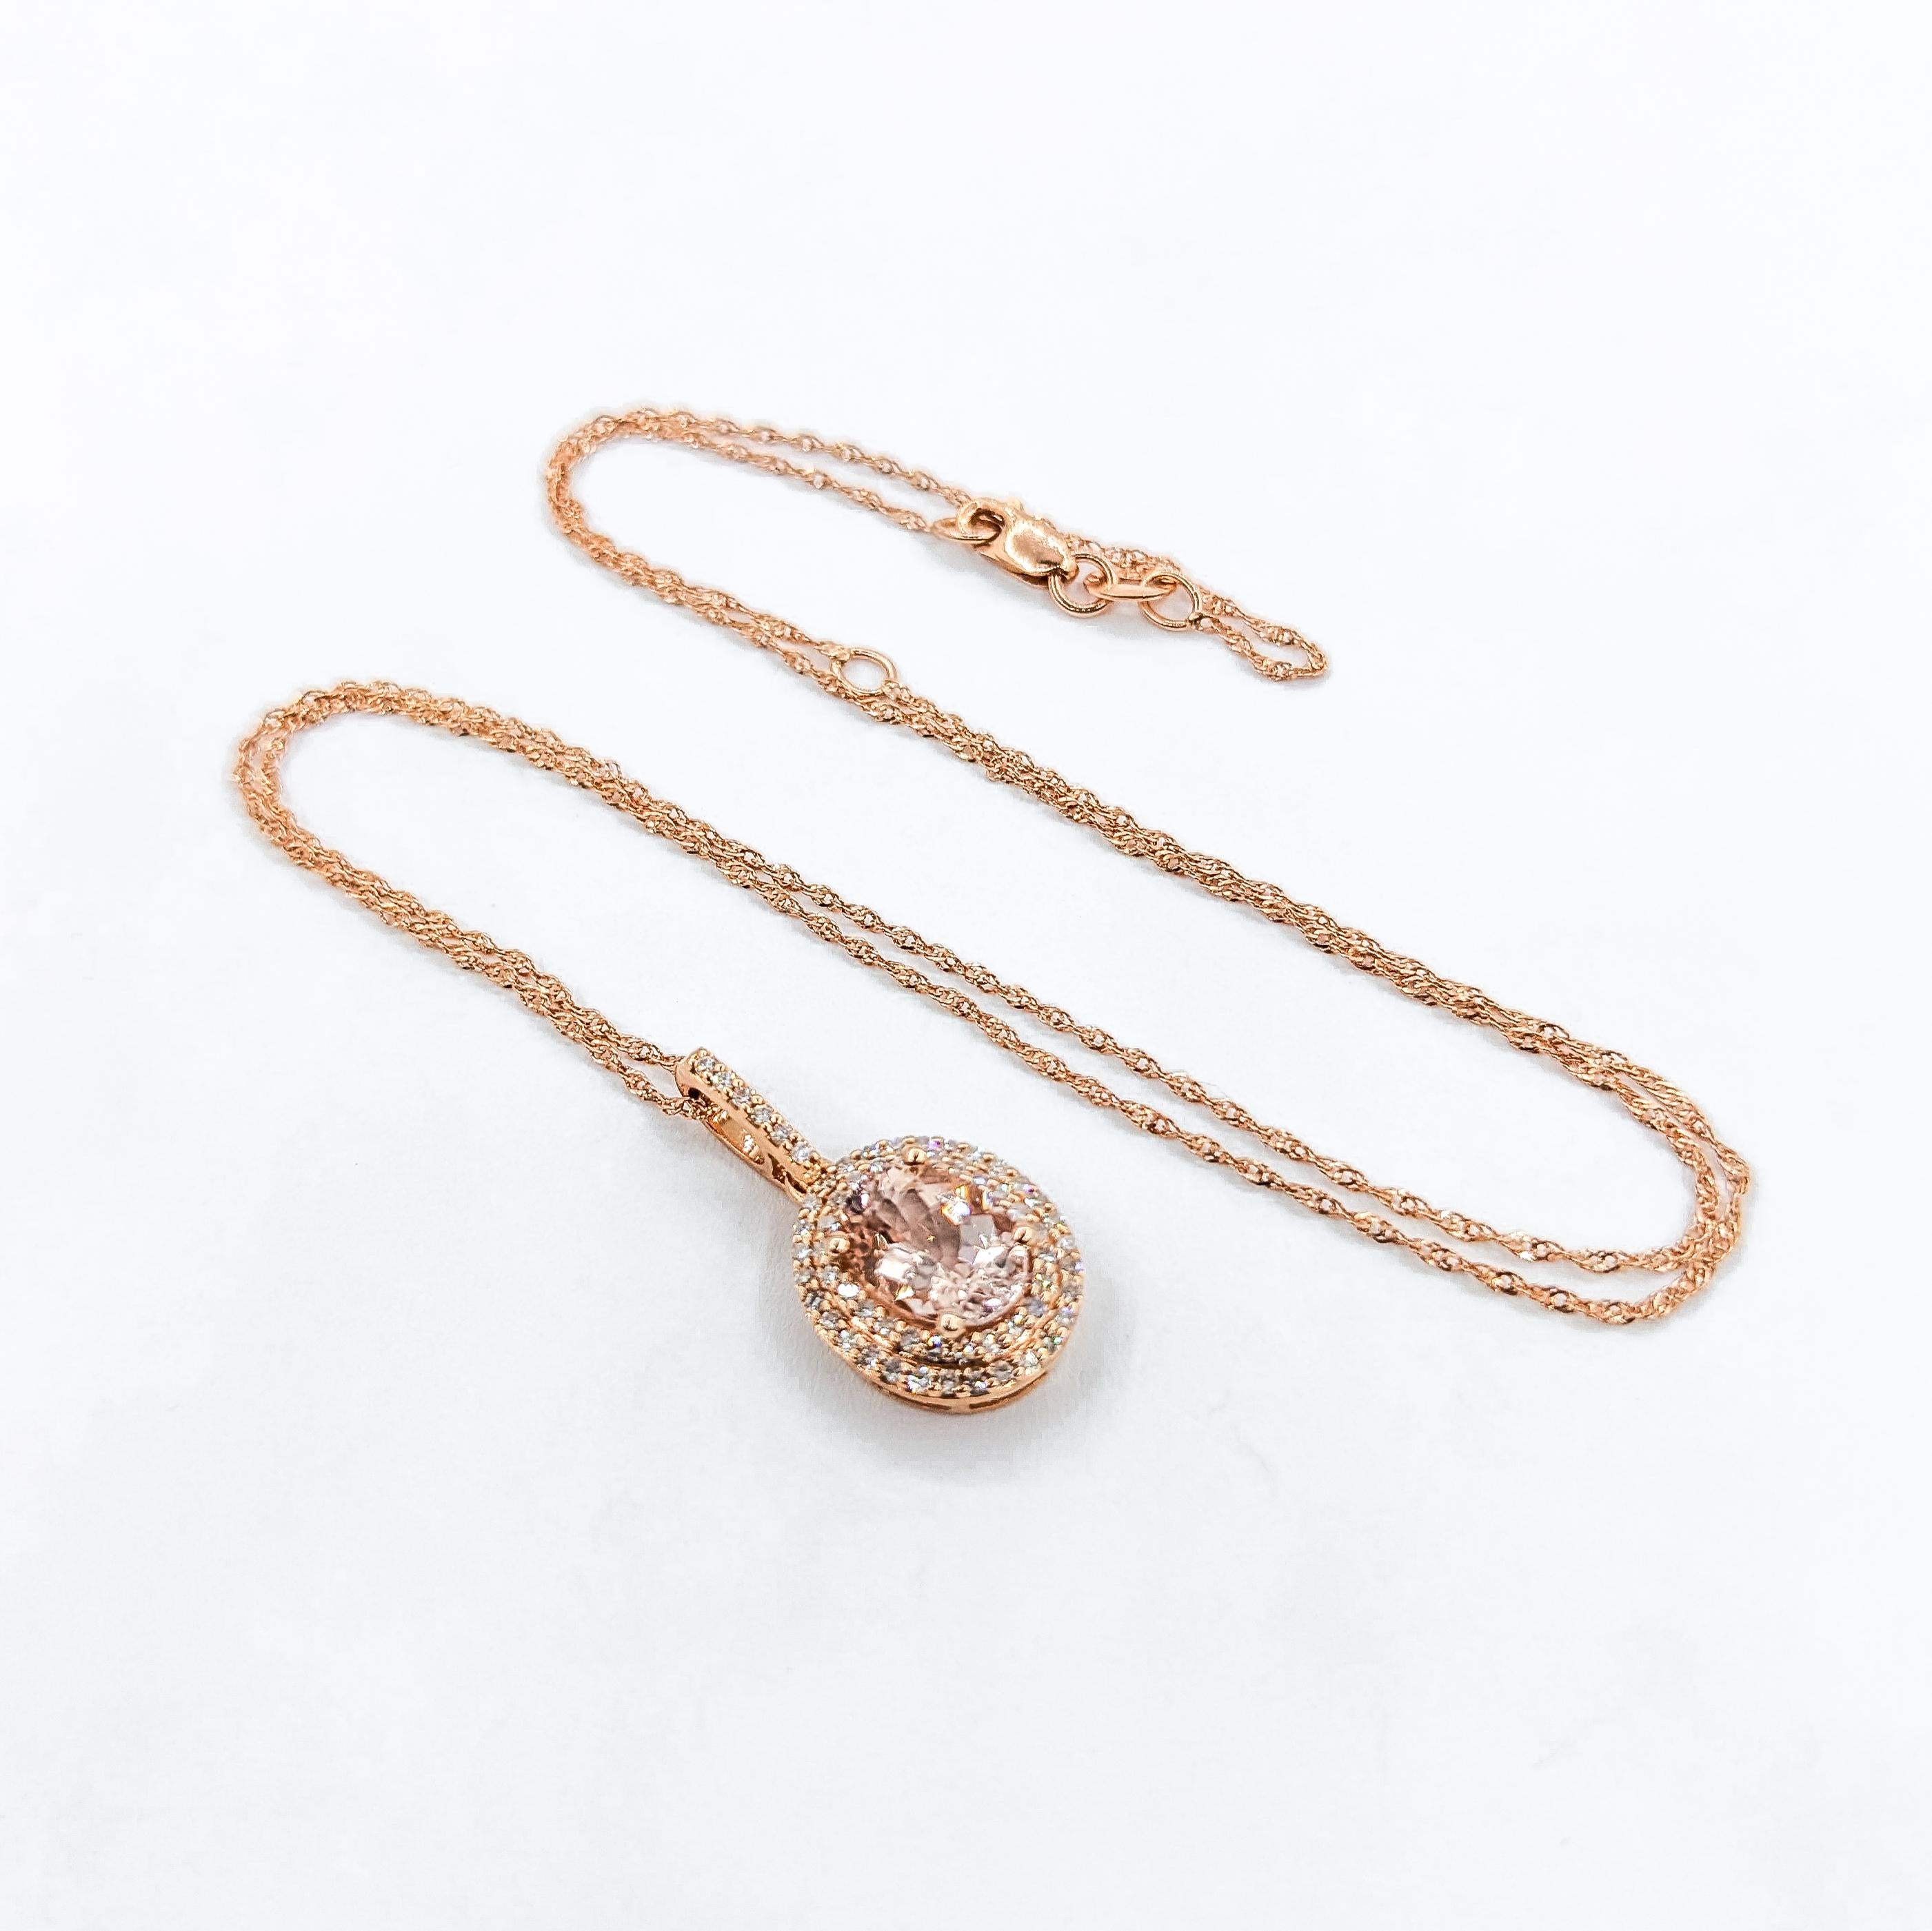 Vintage Morganite & Diamond Halo Necklace in Rose Gold

Introducing our elegant Morganite & Diamond Pendant in 14K Rose Gold. This piece features a 1.10 carat Morganite adorned by 0.21 carats of glittering Diamonds in the form of a double halo. The